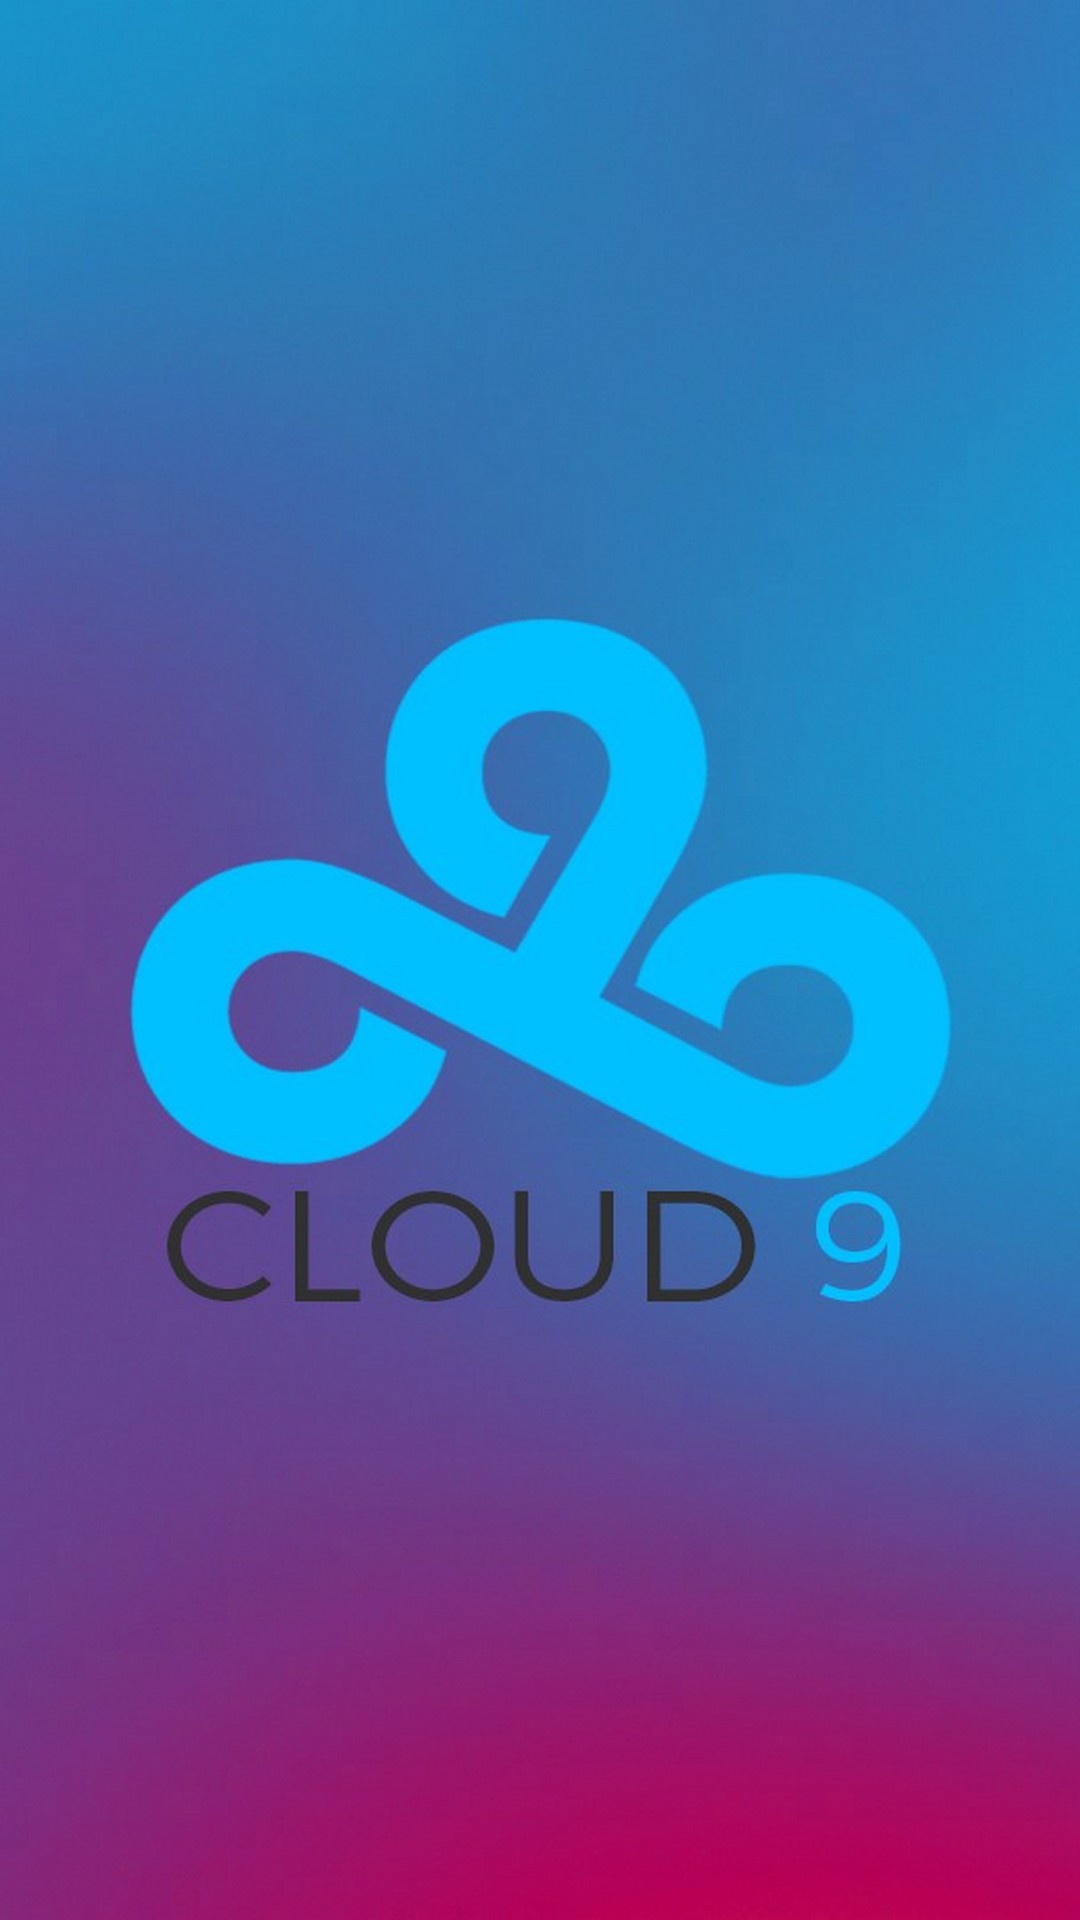 Cloud9 iPhone Wallpaper with HD Resolution 1080X1920